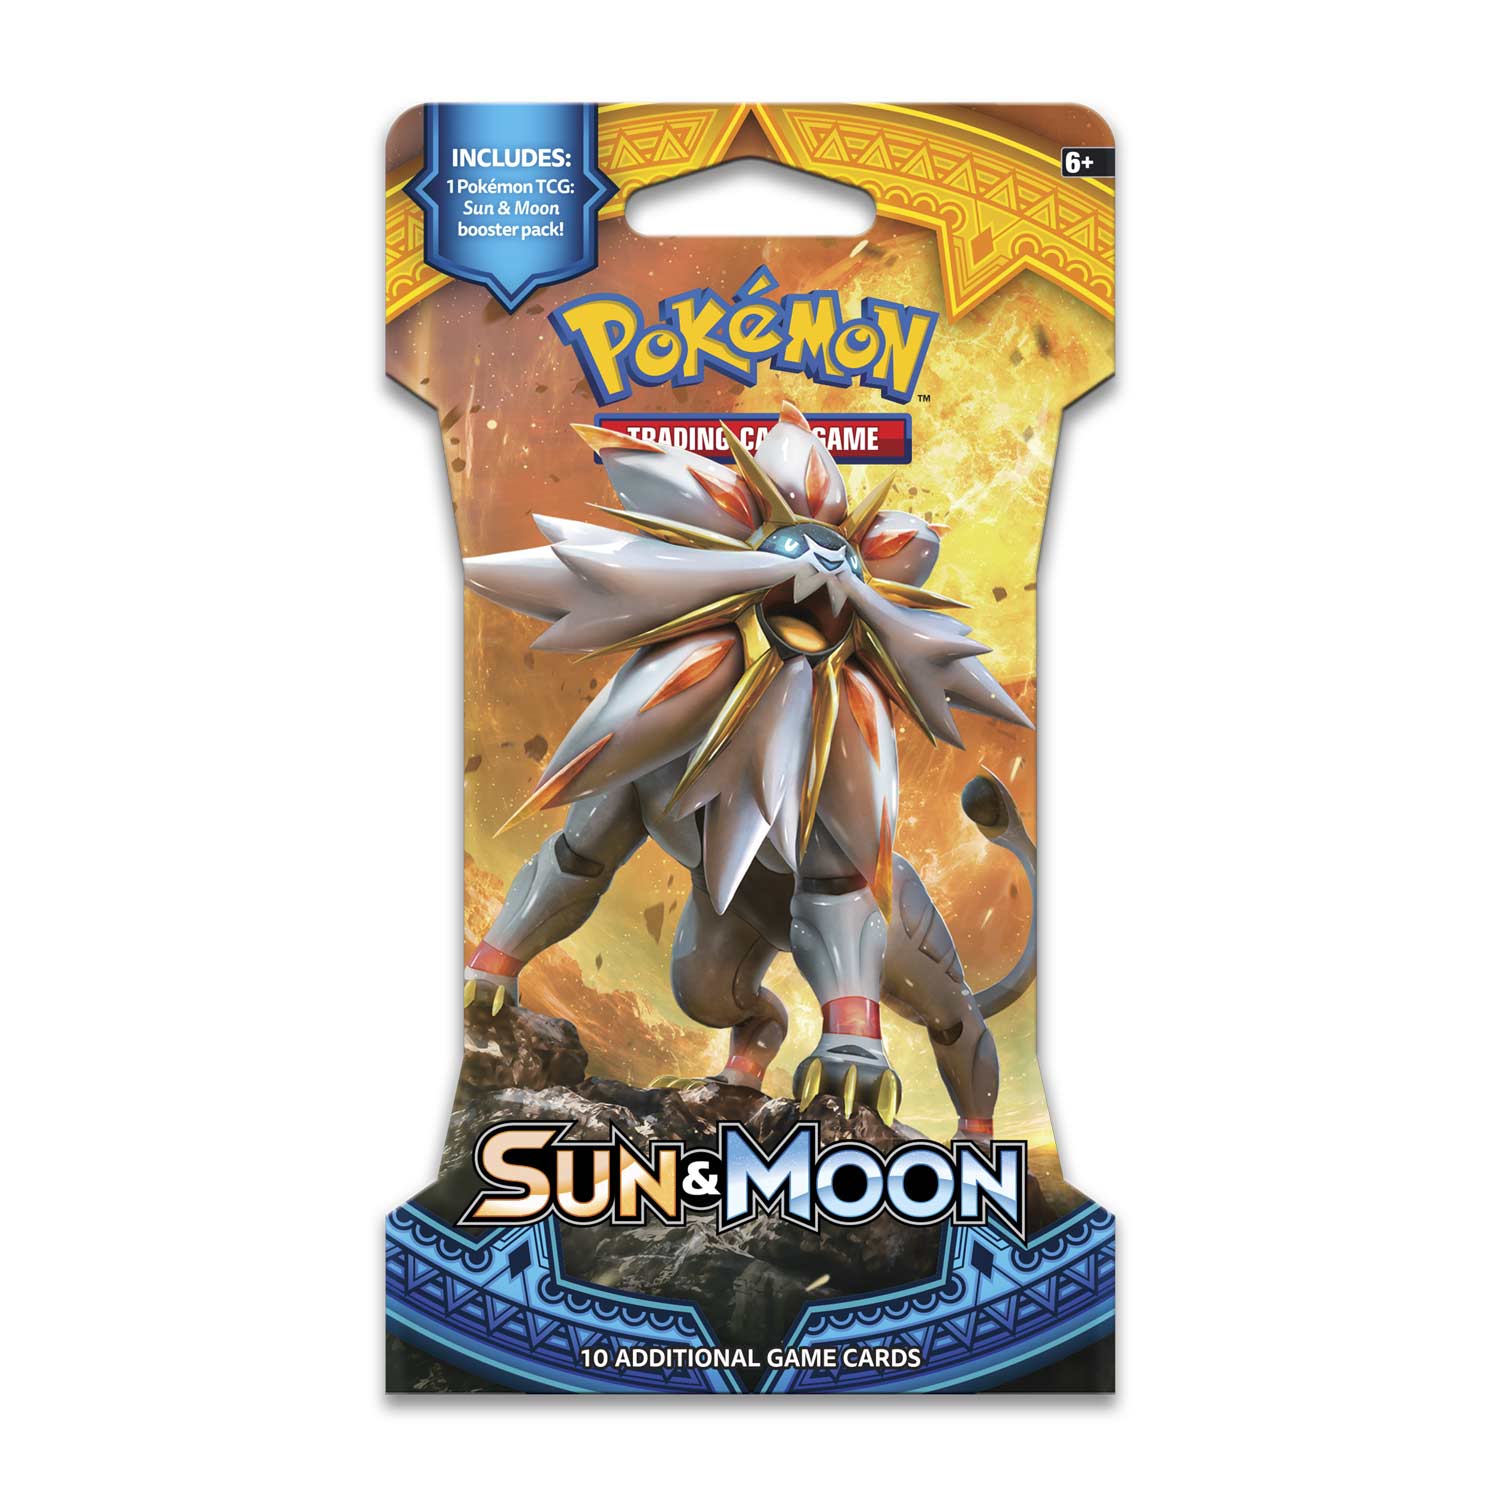 1 Sun & Moon Base Set Booster Pack Pokemon SM 10-Cards New Sealed English 